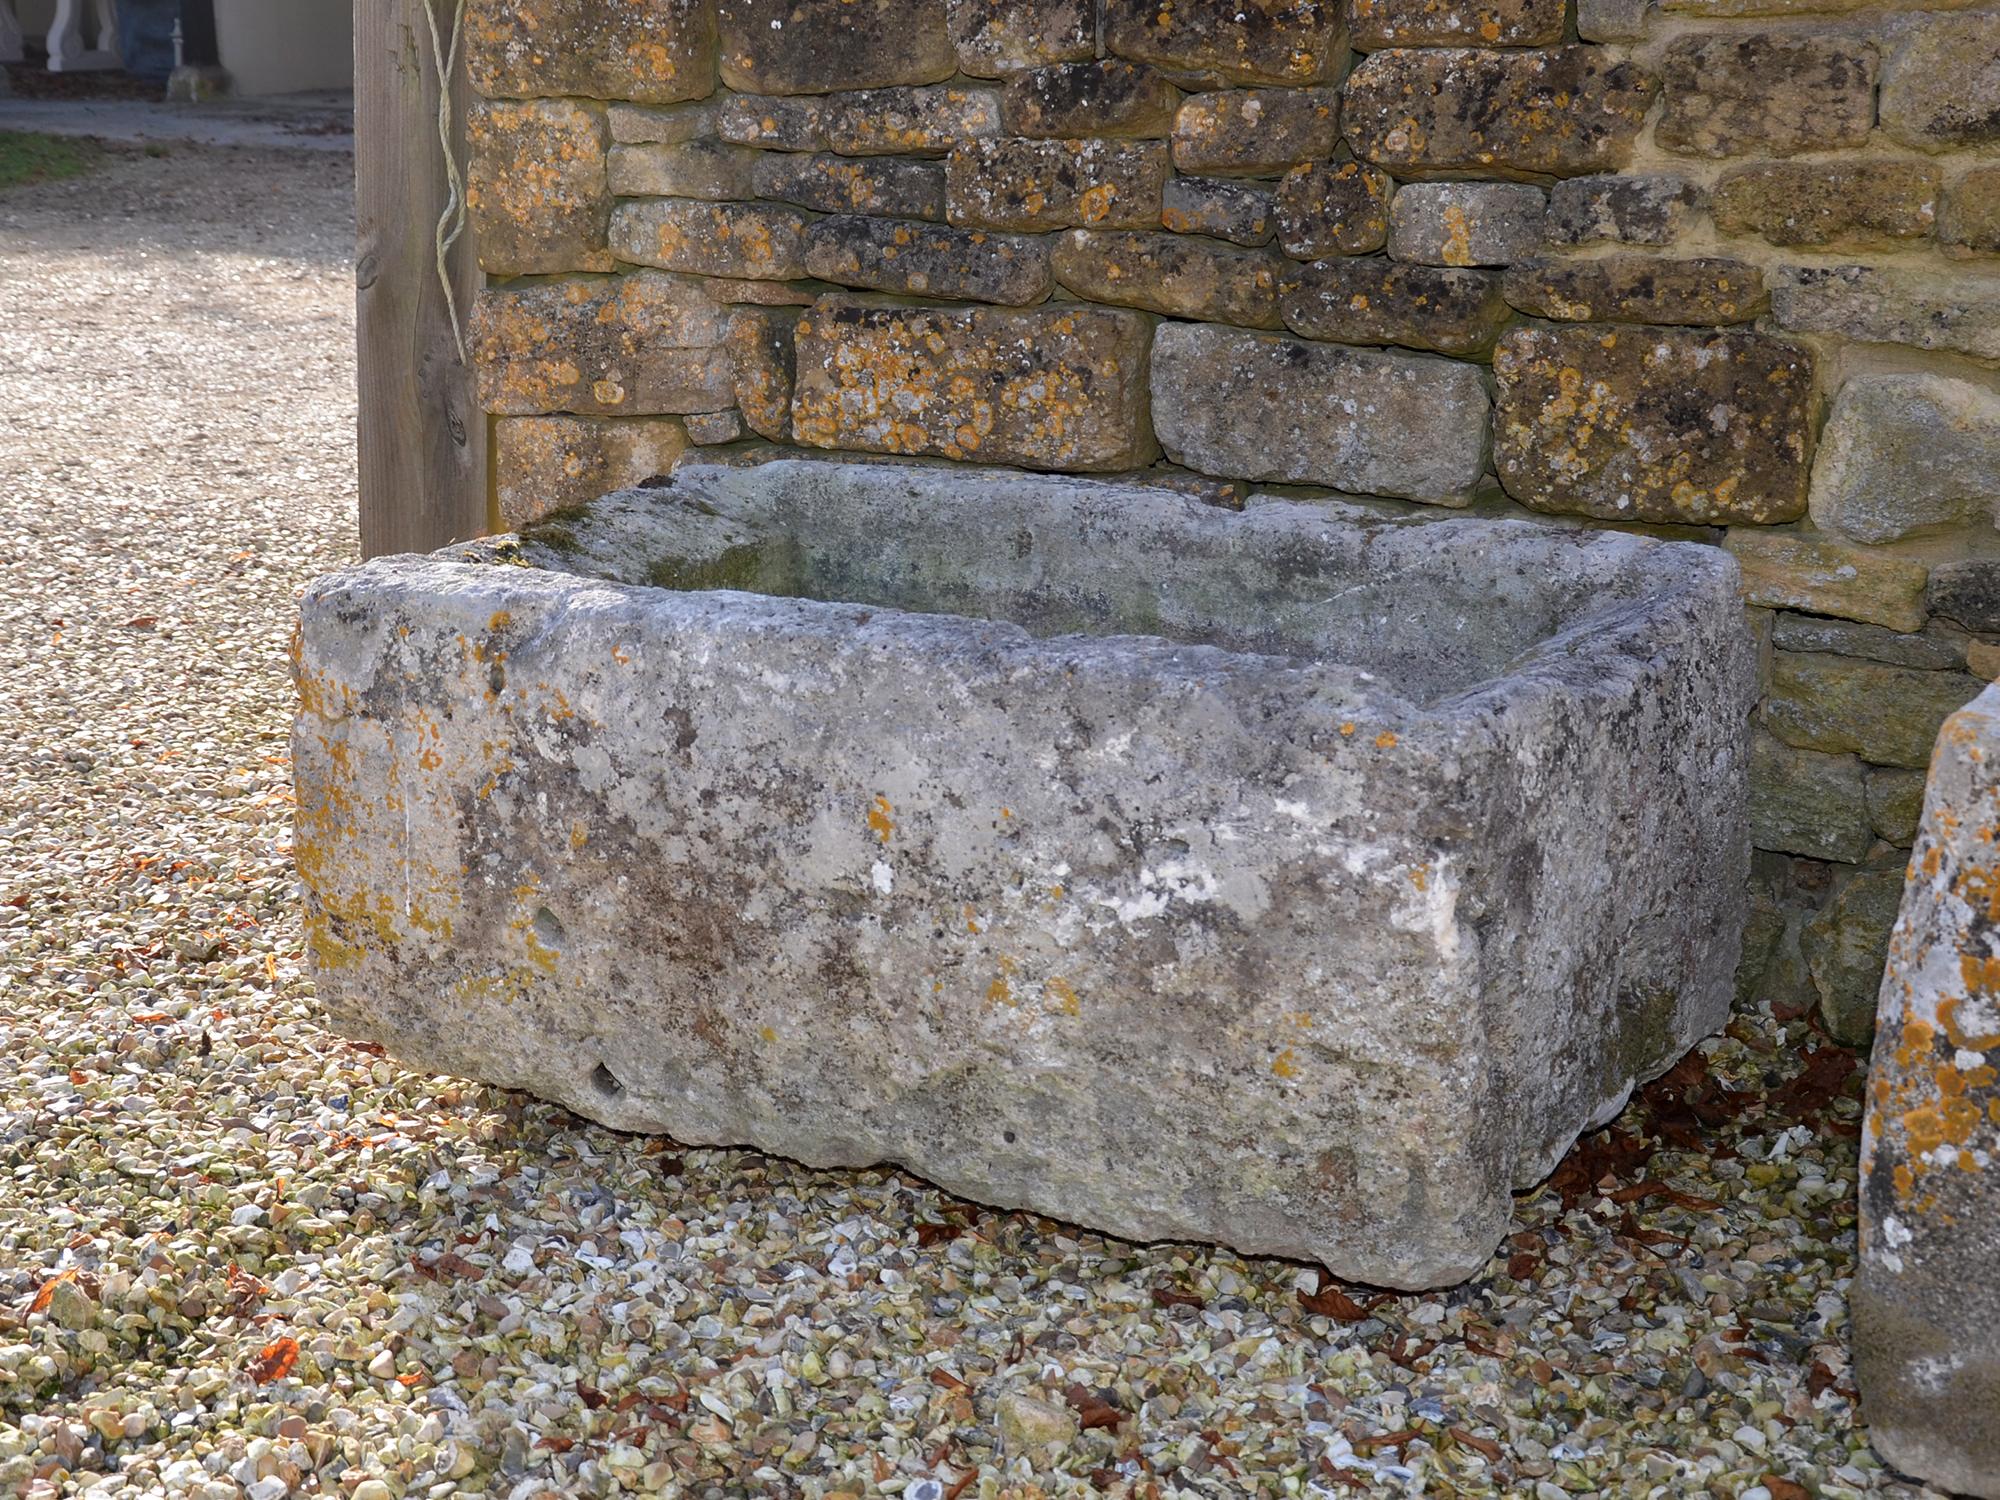 Antique limestone trough with good weathering and patination.